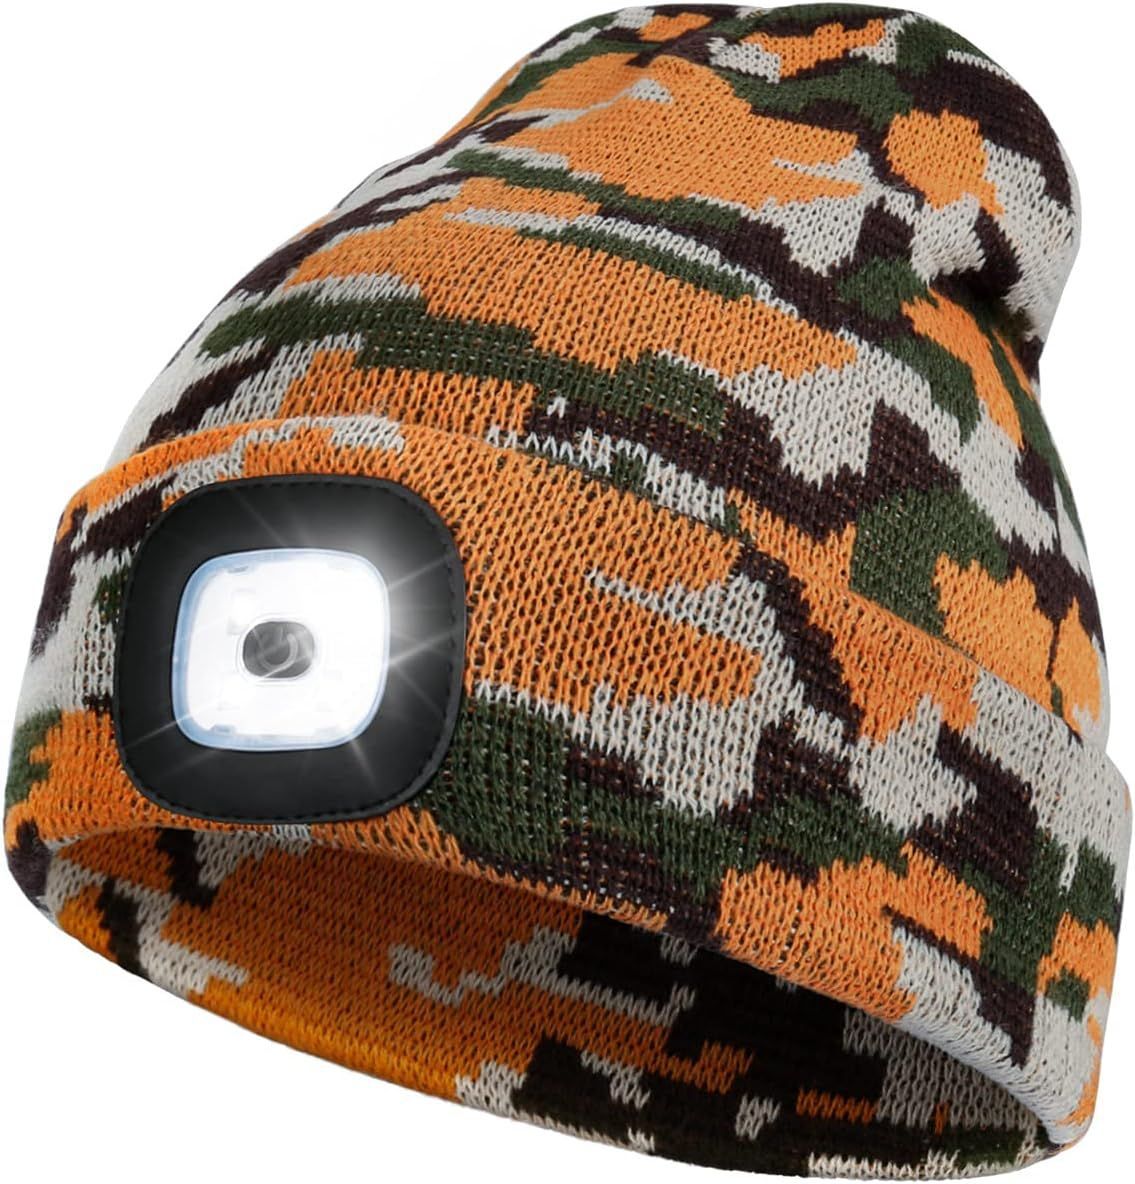 LED Beanie Hat with Light USB Rechargeable 4 LED Headlamp Cap Knitted Night Lighted Winter Hat Flashlight for Running Climbing